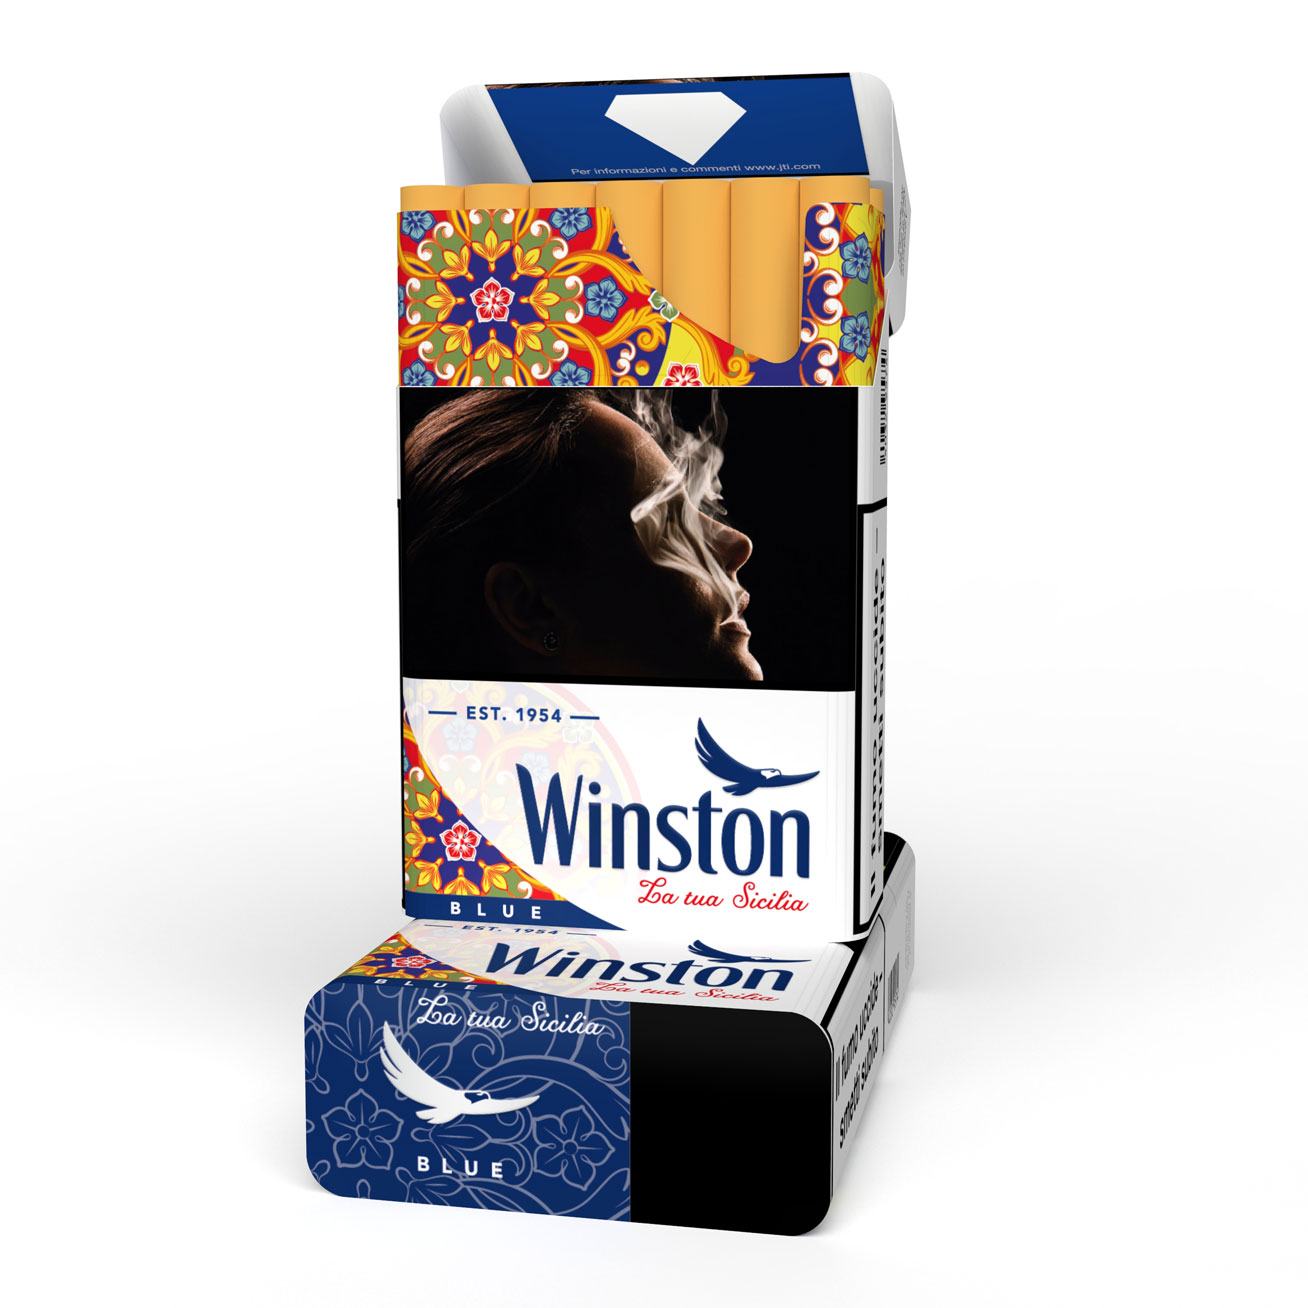 JTI_21_WINSTON_SICILY_PACK_LIMITED_EDITION_1